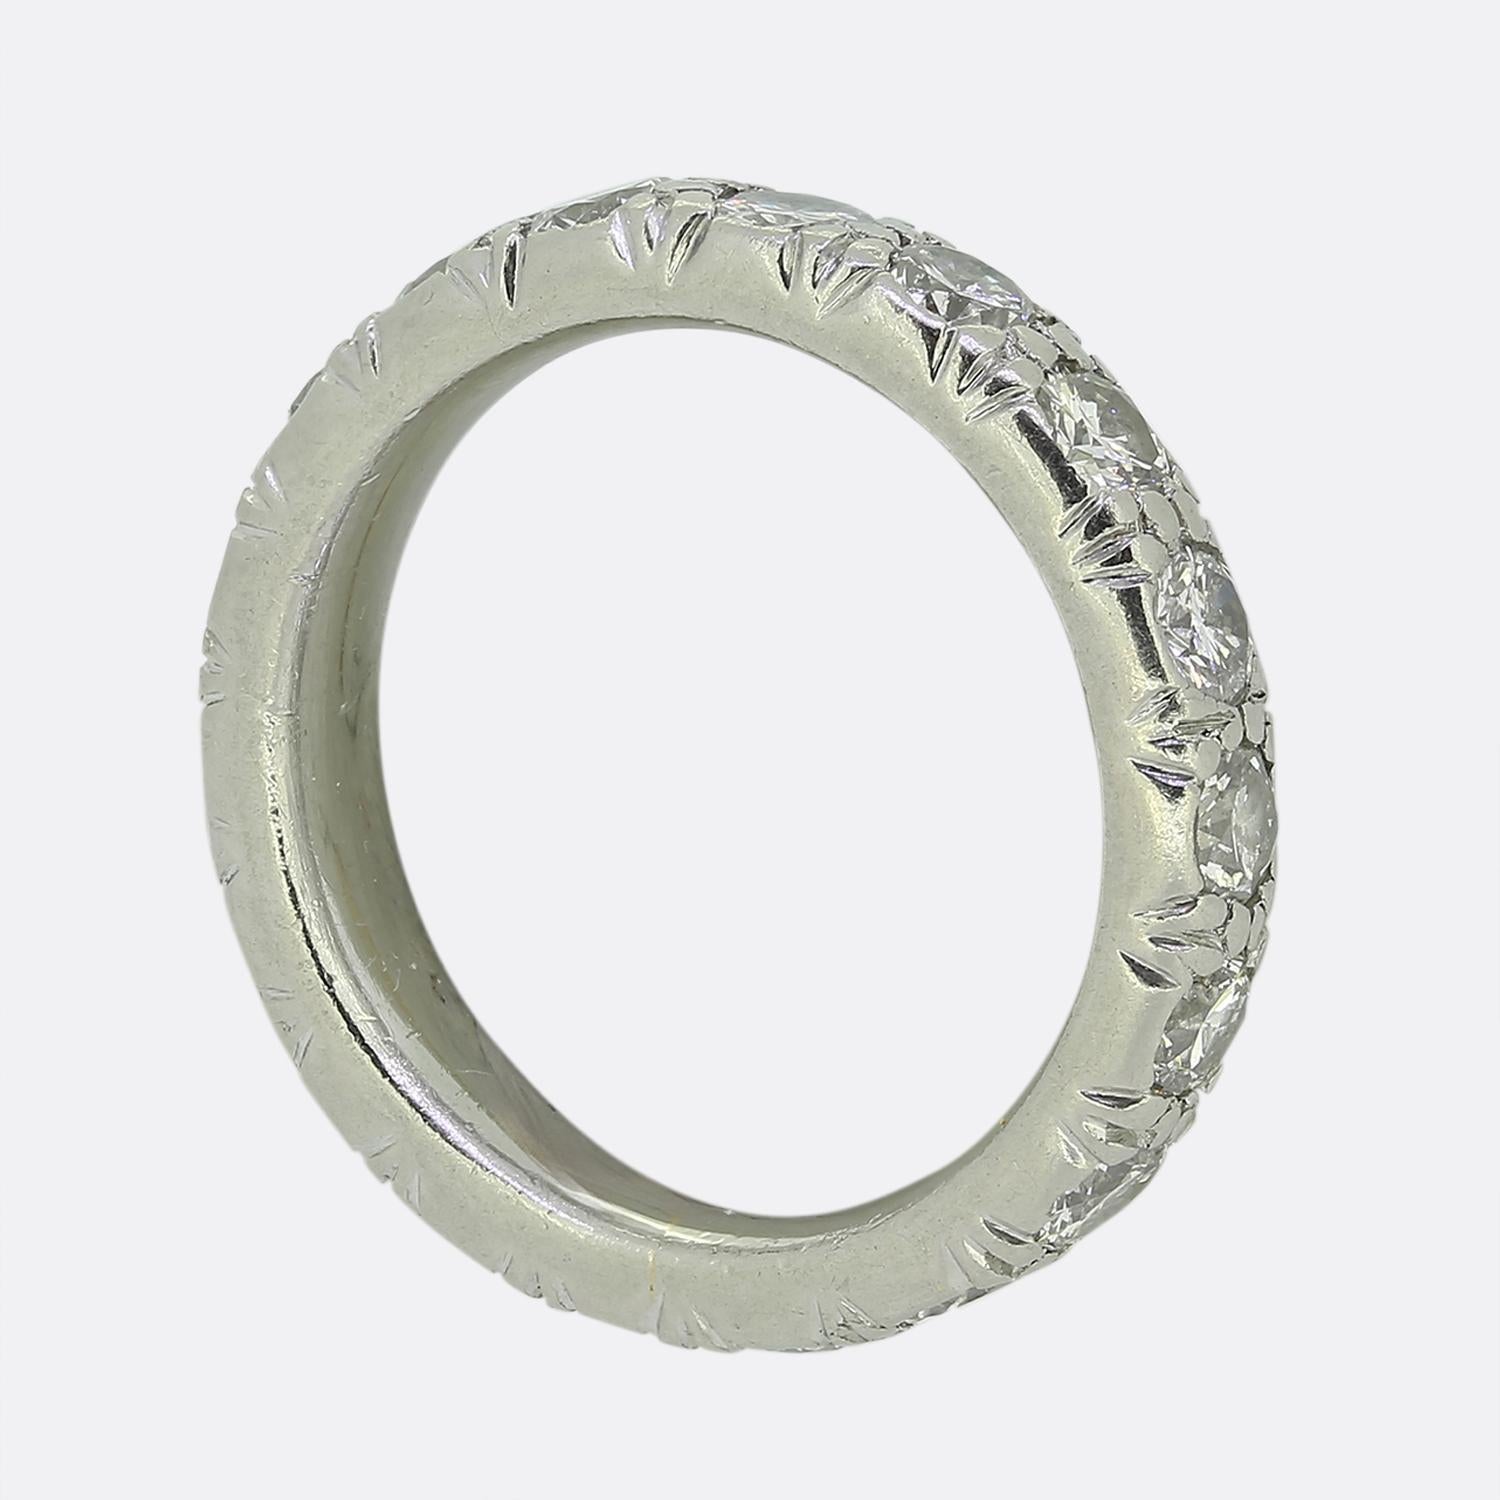 Here we have a classically styled full eternity diamond ring. This piece has been crafted from platinum and features 18 round brilliant cut diamonds which have been individually claw set in a single line formation around the outer edge. Each stone